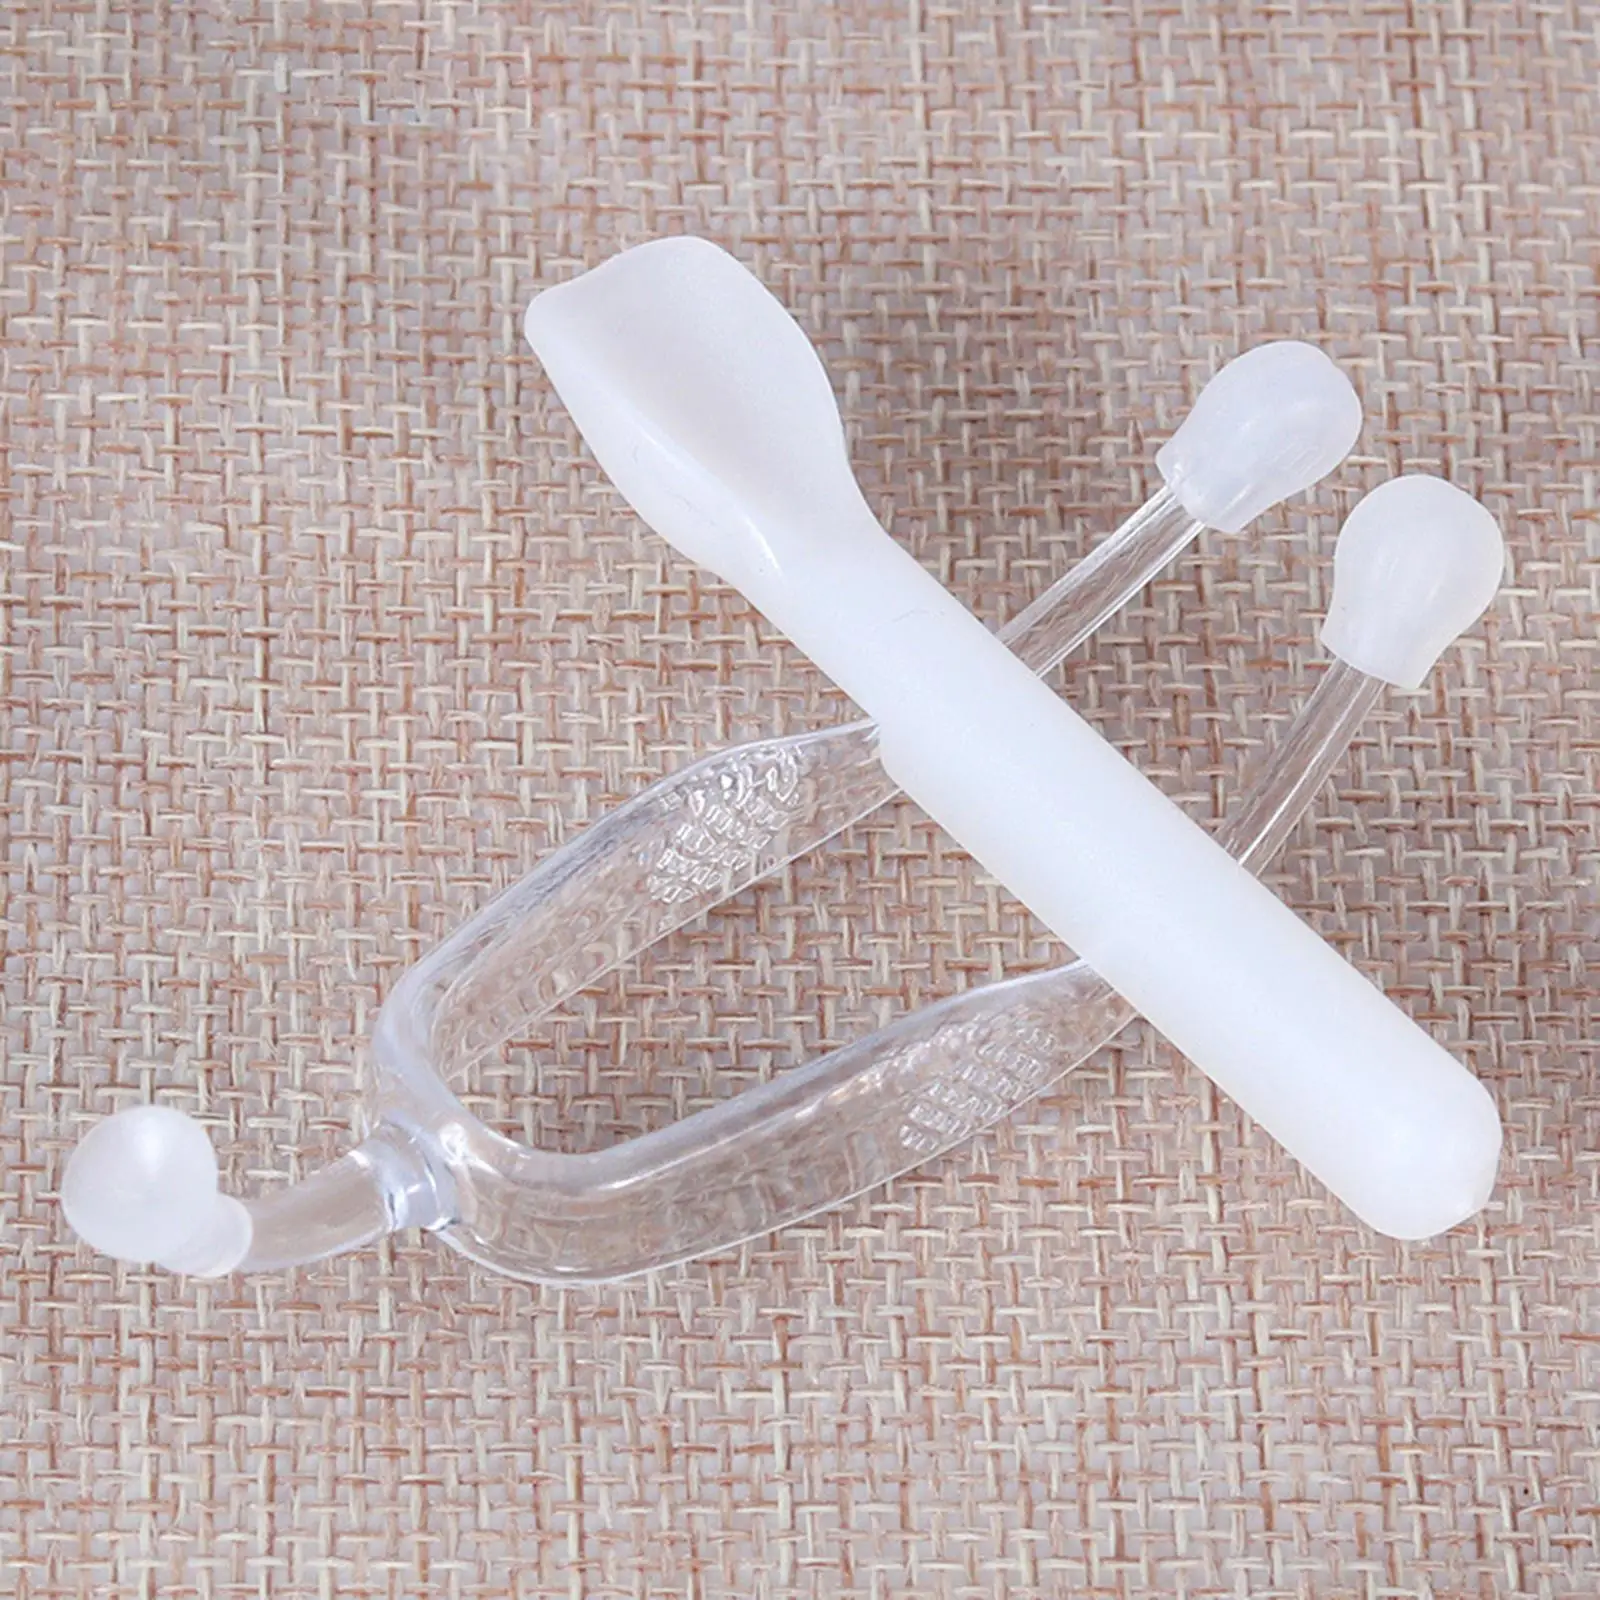 Contact Lense Remover Tool Soft Tip Tweezer Stick Tool Insertion Removal Solution Stick for Travel and Home